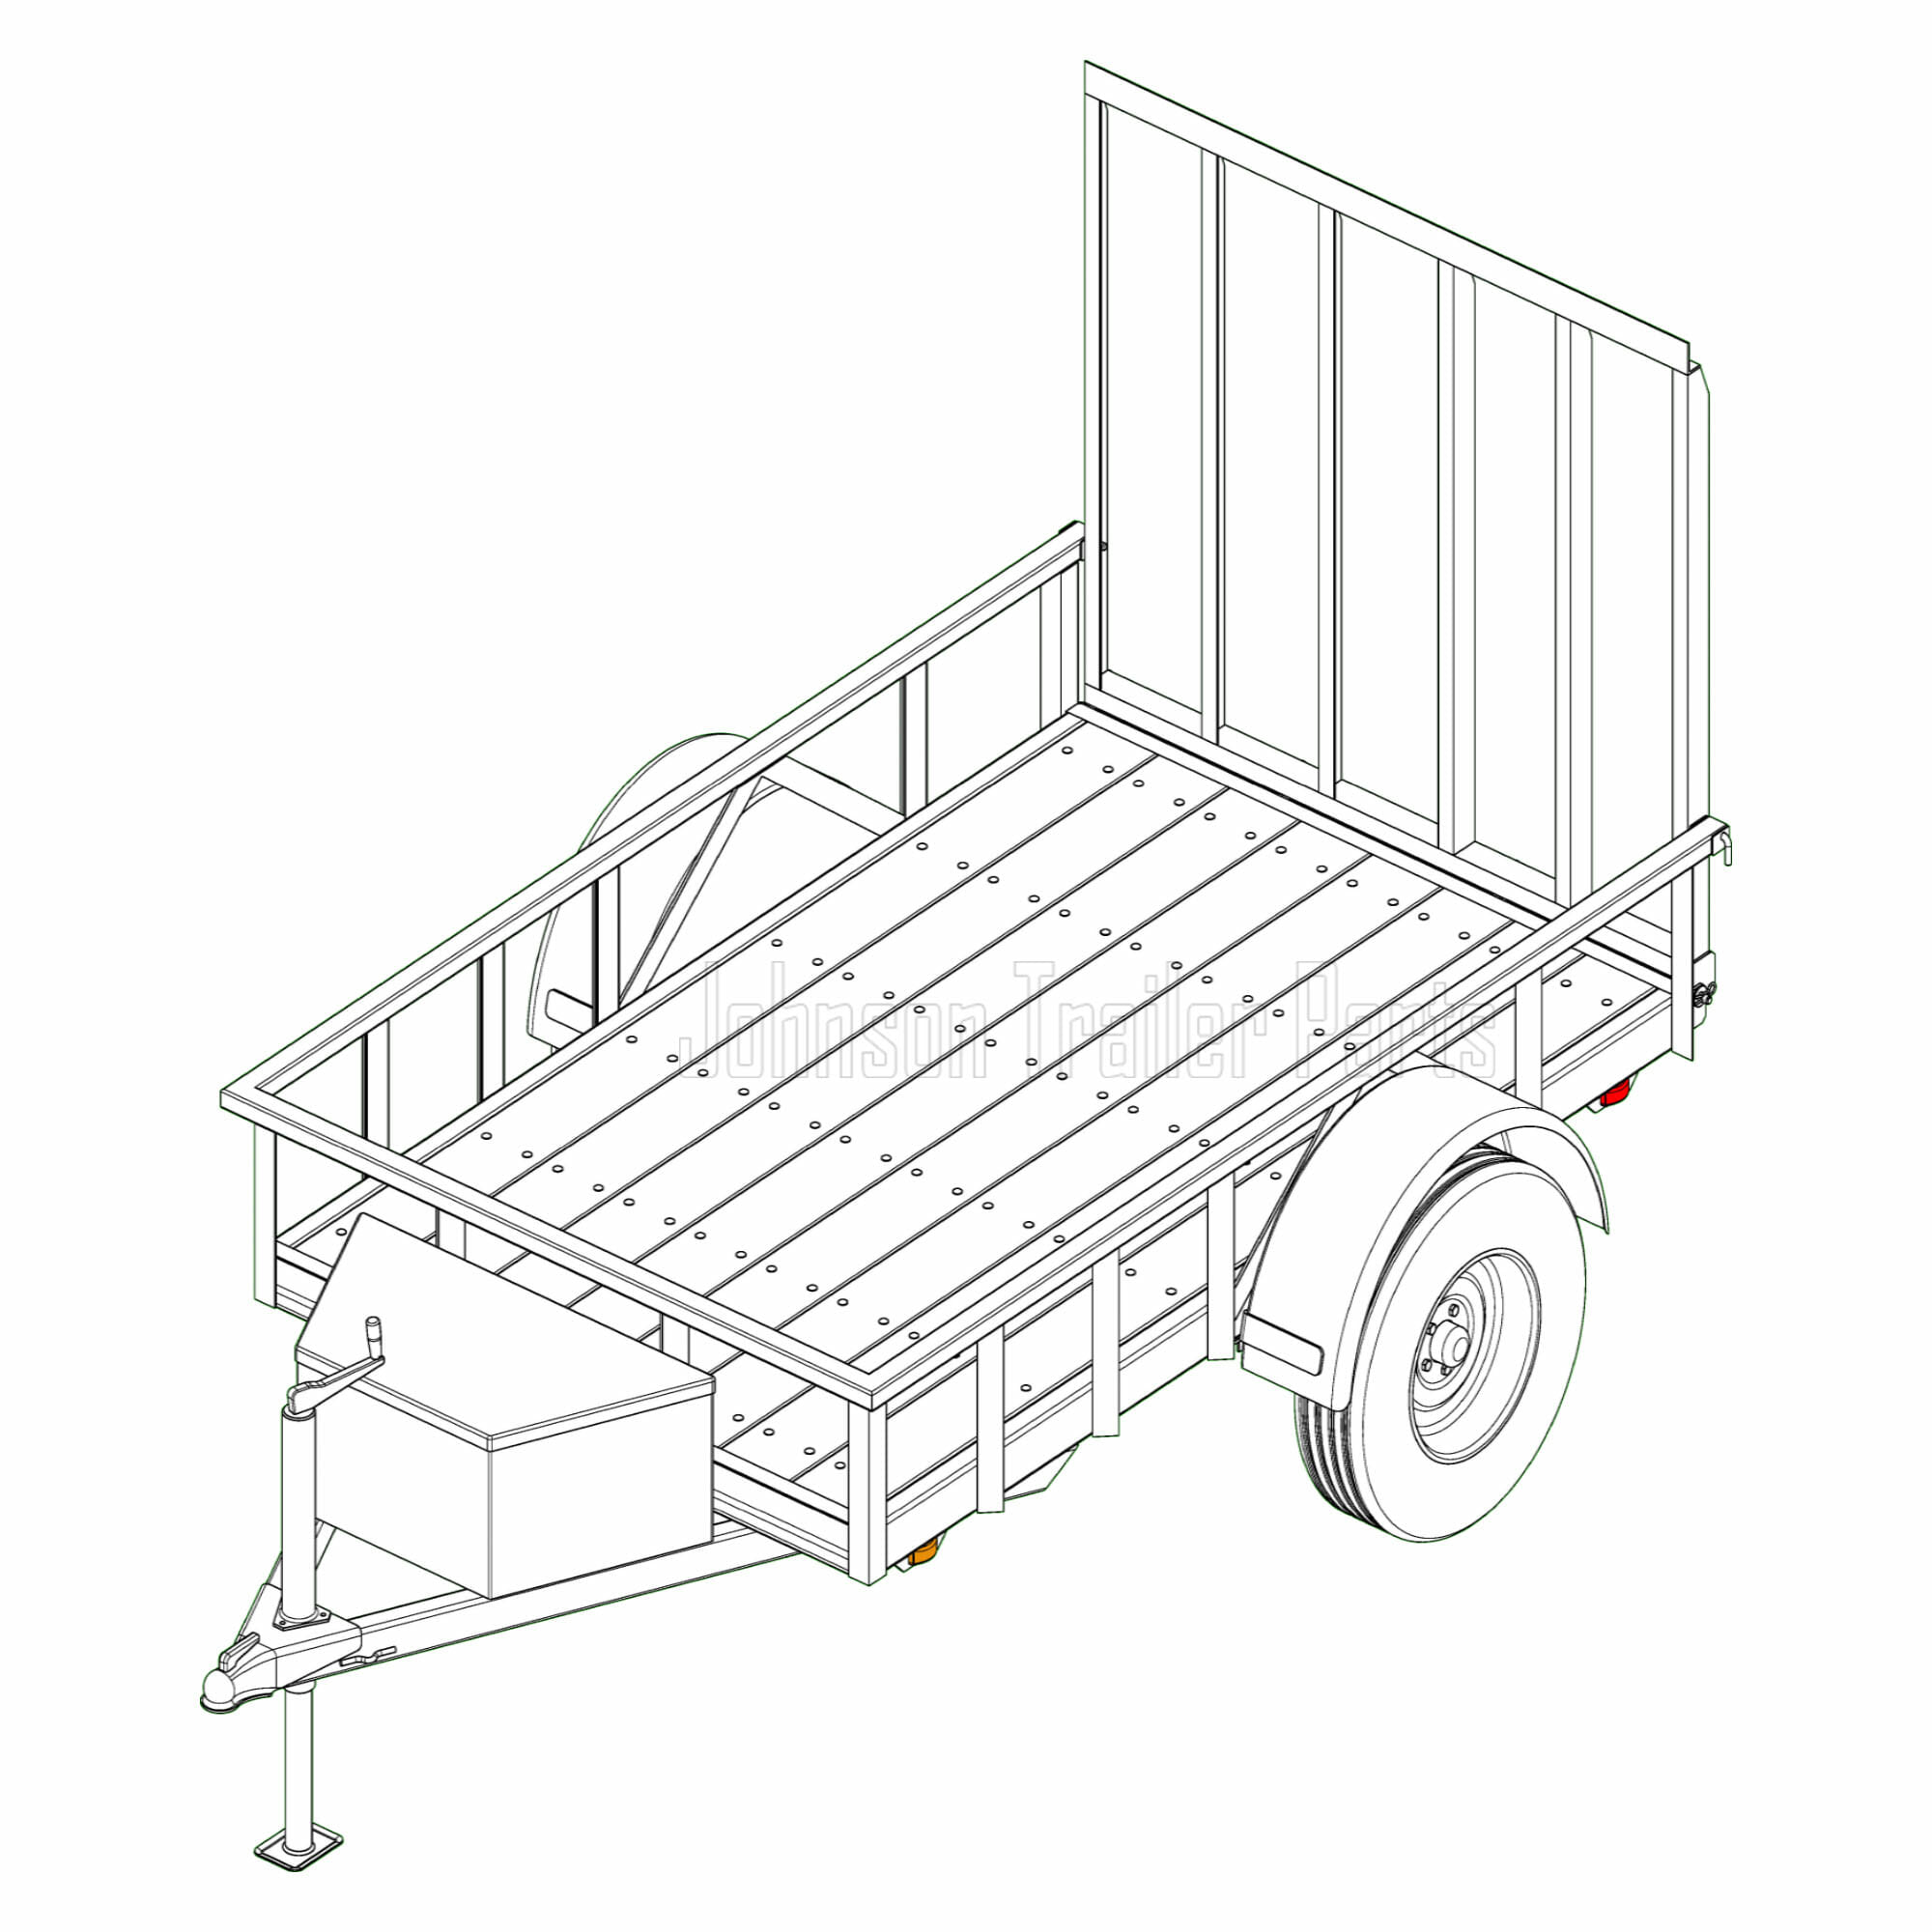 home made trailer plans how to build diy pdf download uk